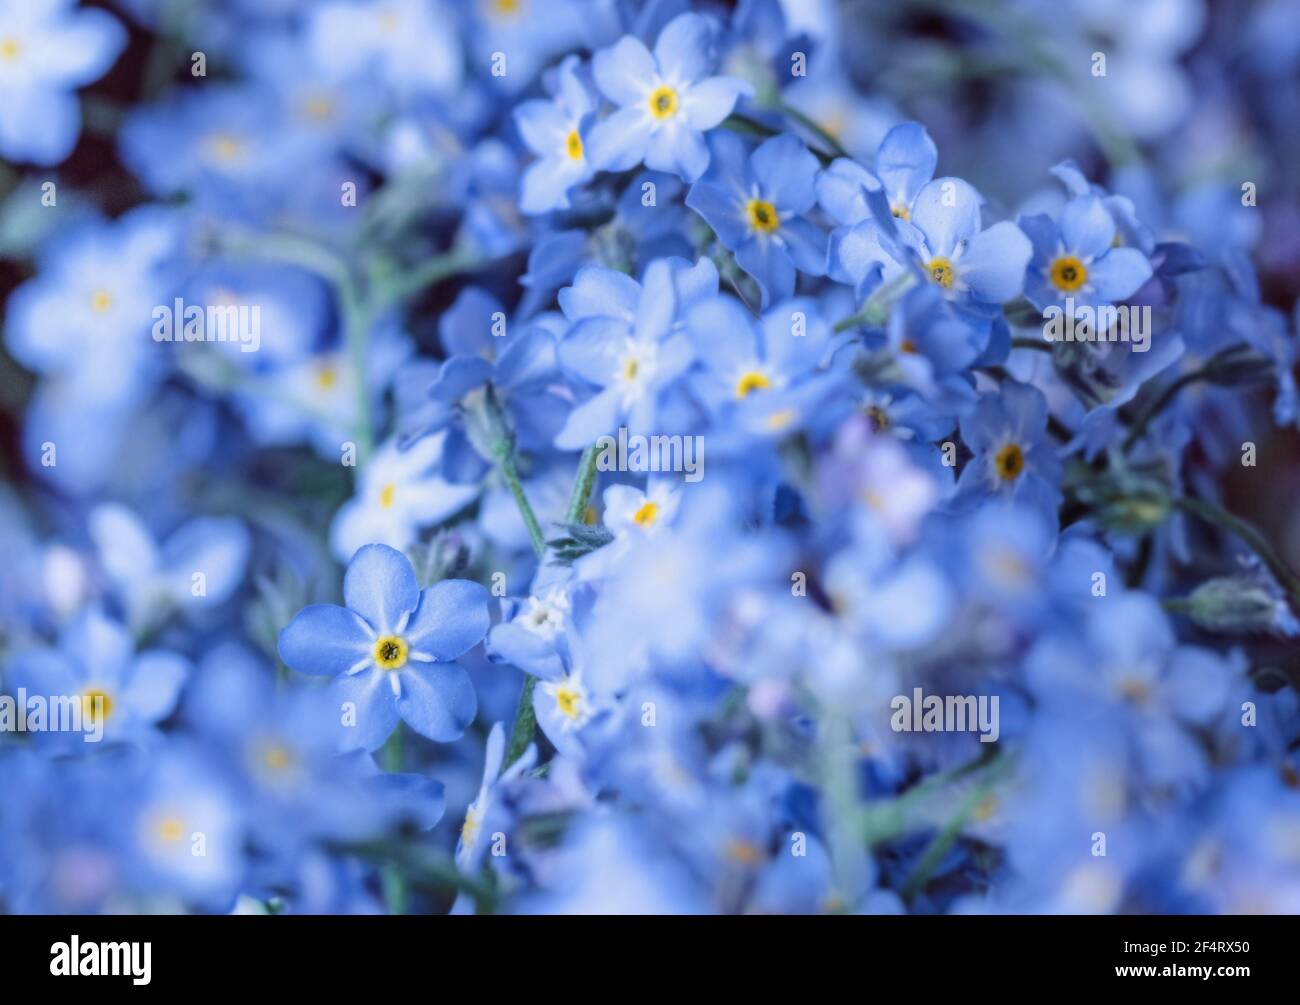 Real charming blue forget-me-not flowers for romantic and idyllic mood Stock Photo